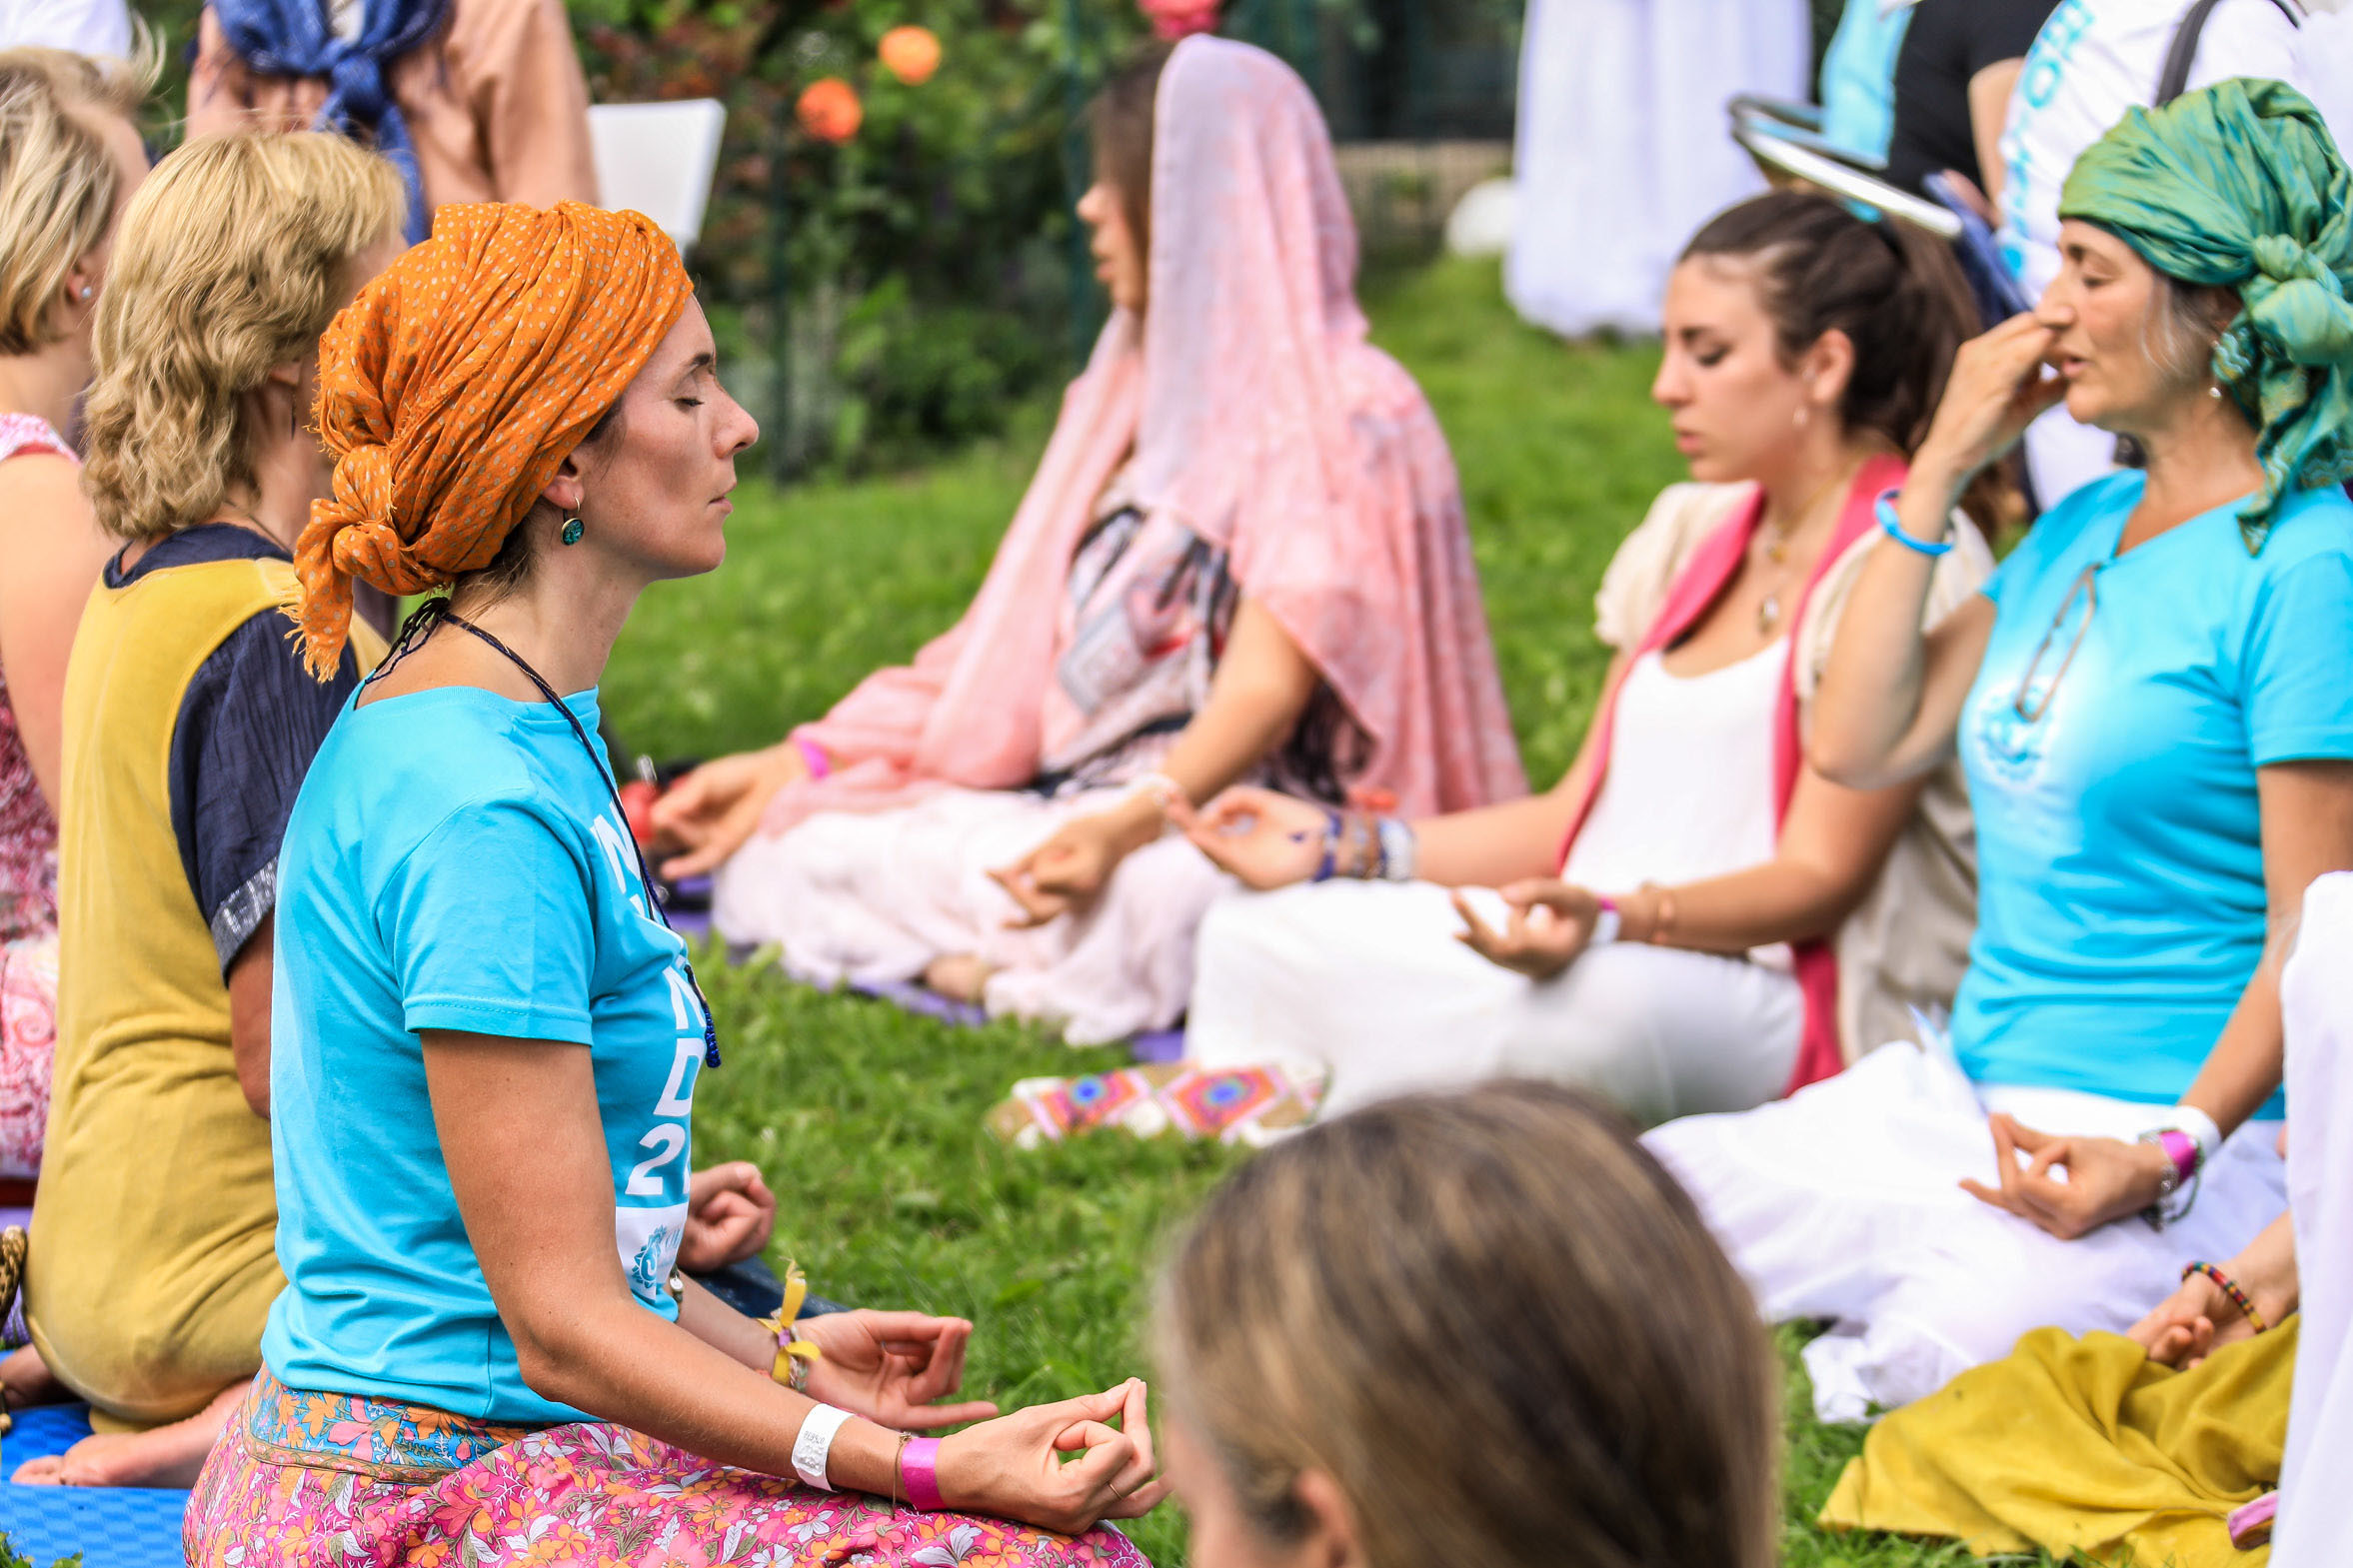 OM Chanting session in action at a Dublin venue.